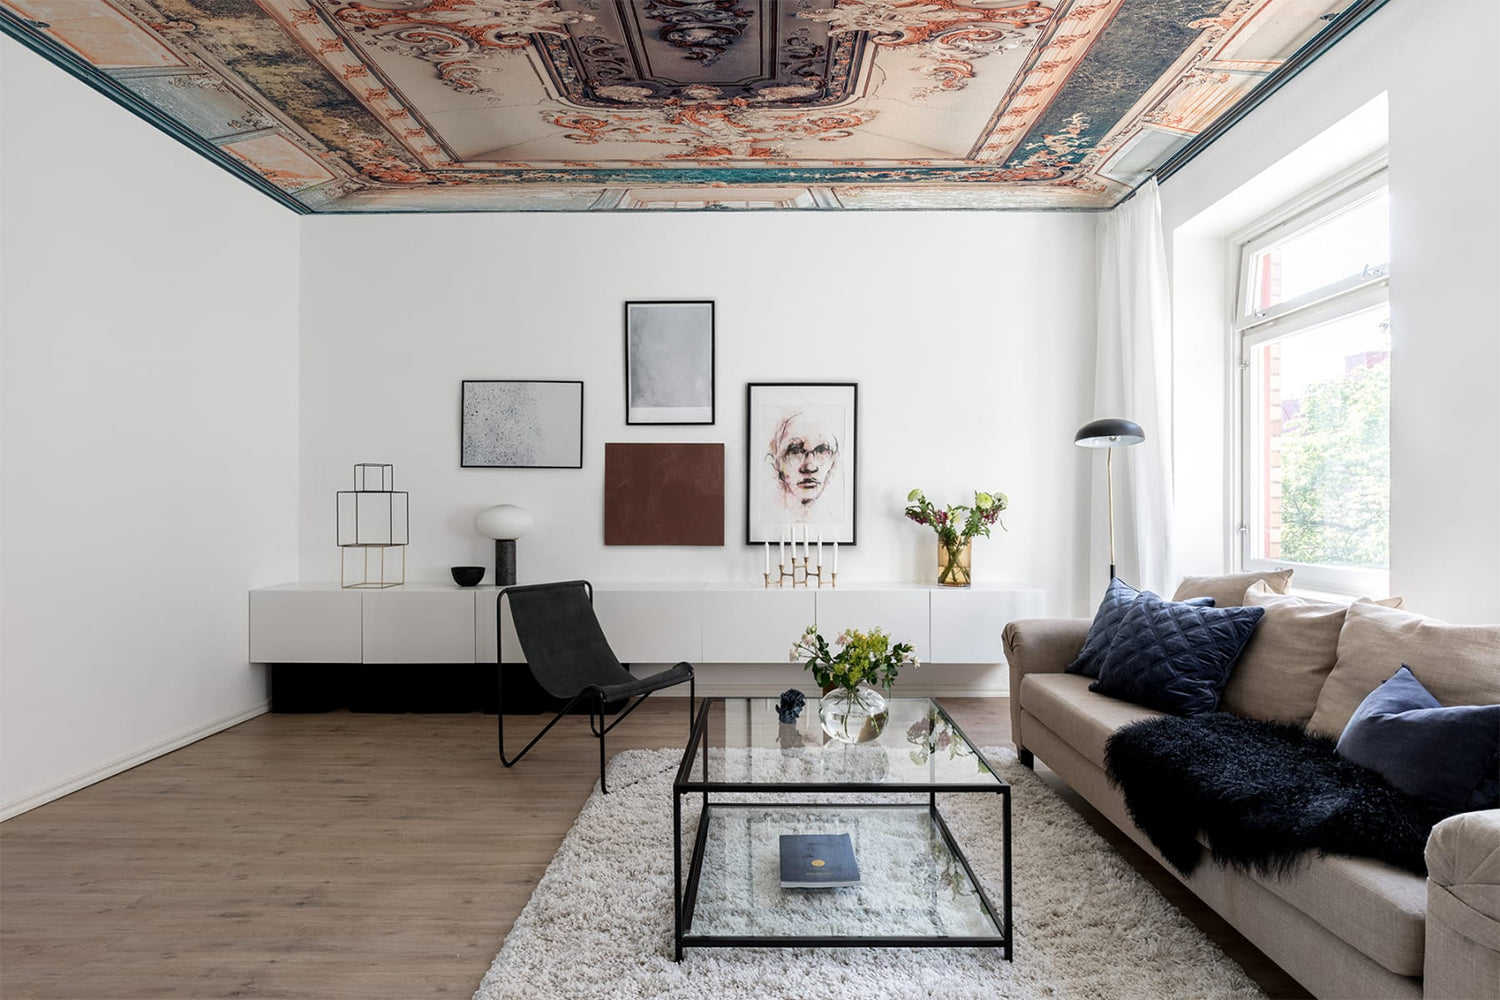 Sophie, Art Mural Wallpaper featured on a ceiling of a living area with cozy lighting and brown sofas with multiple pillows